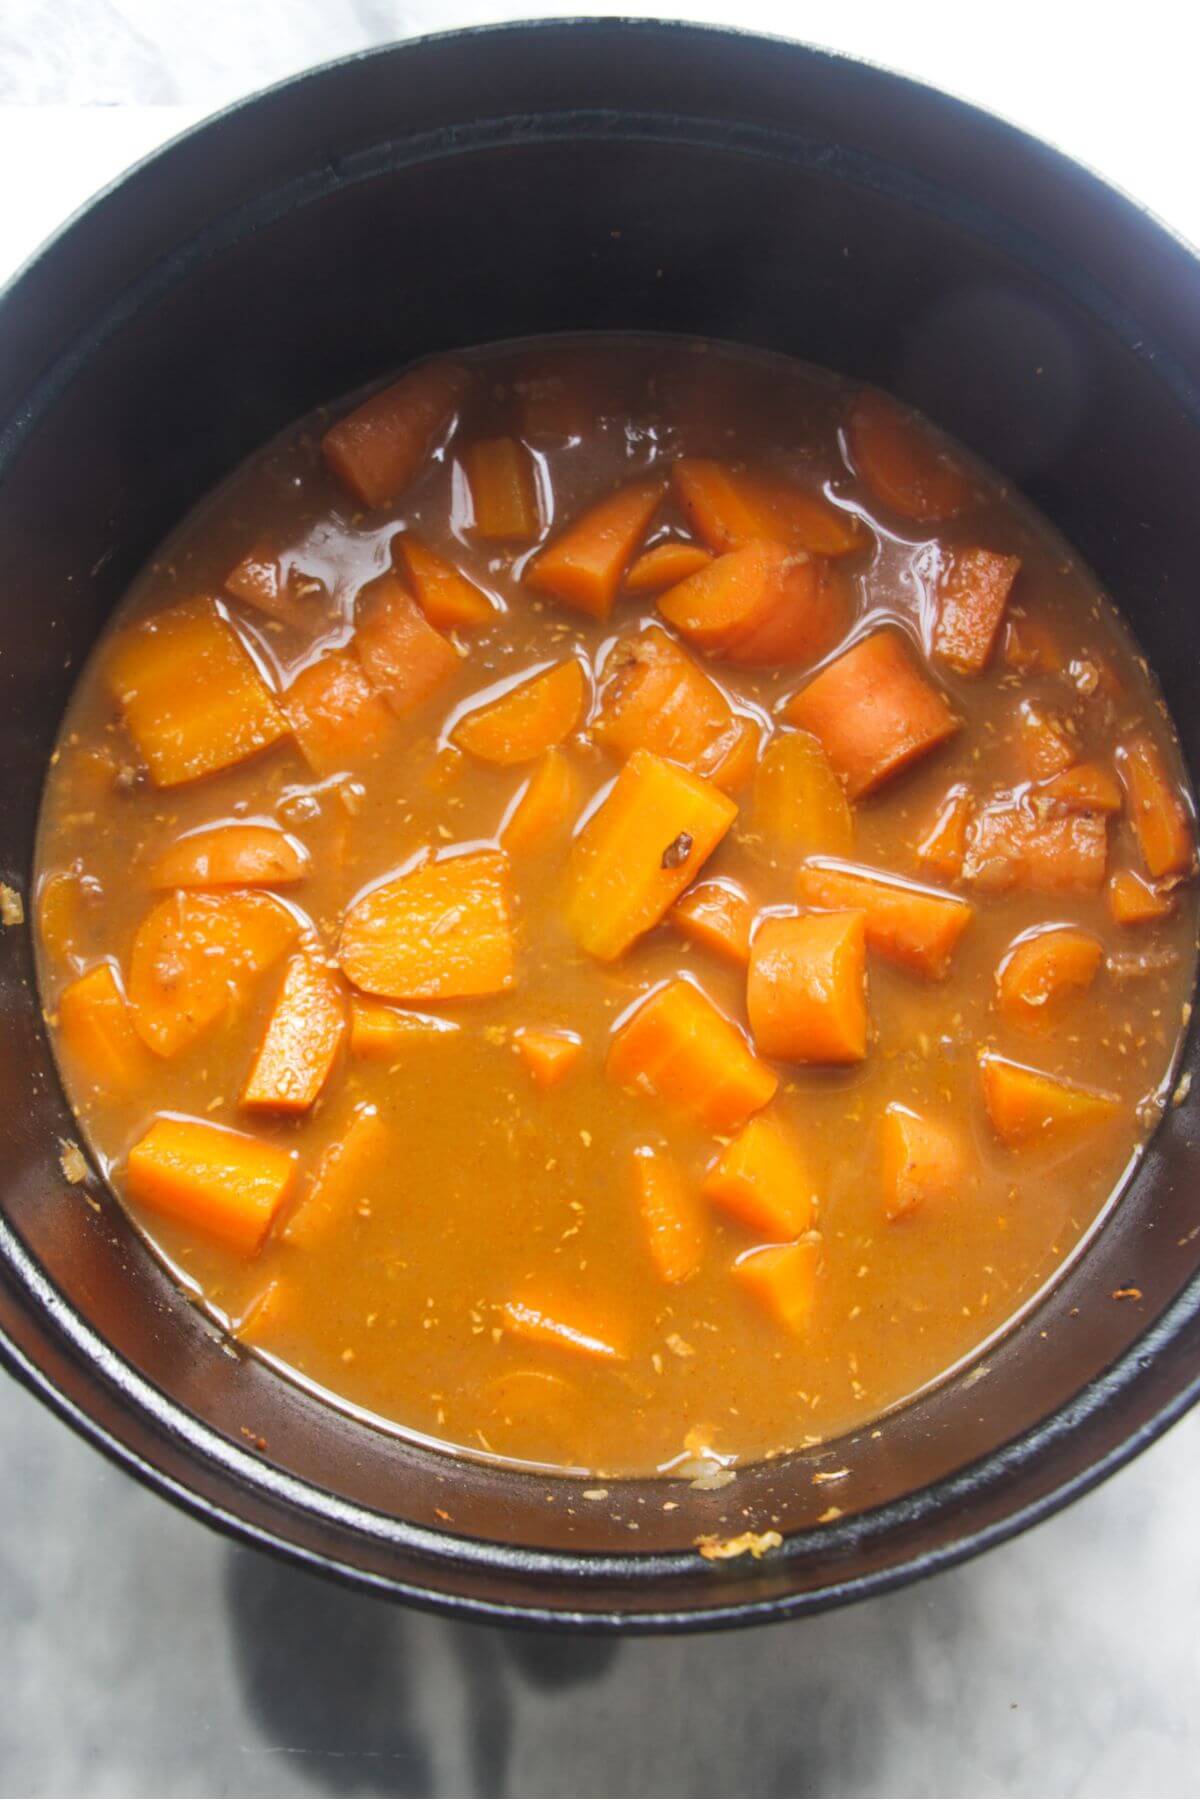 Carrots, stock and seasoning in a large black pot after being simmered.